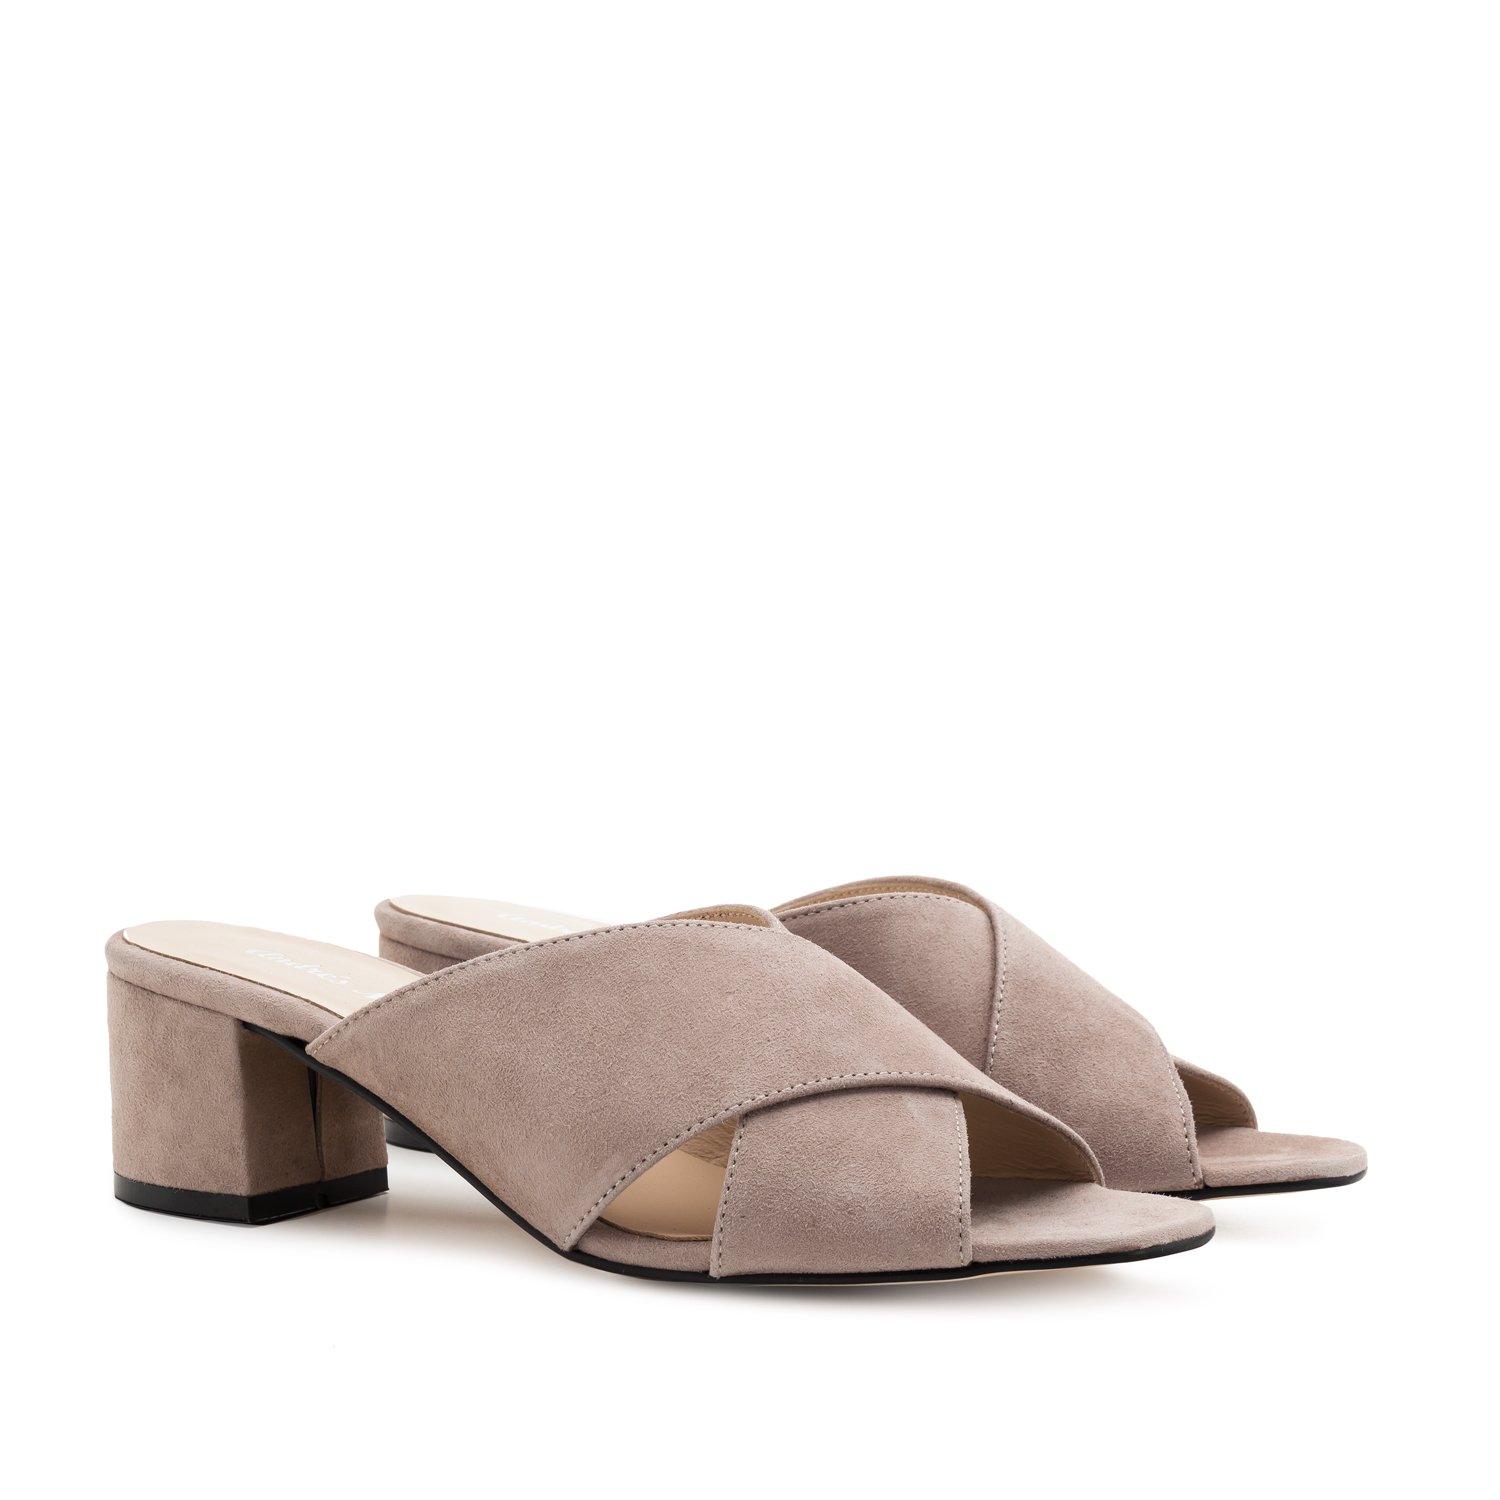 Crossover Mules in Nude Suede Leather 